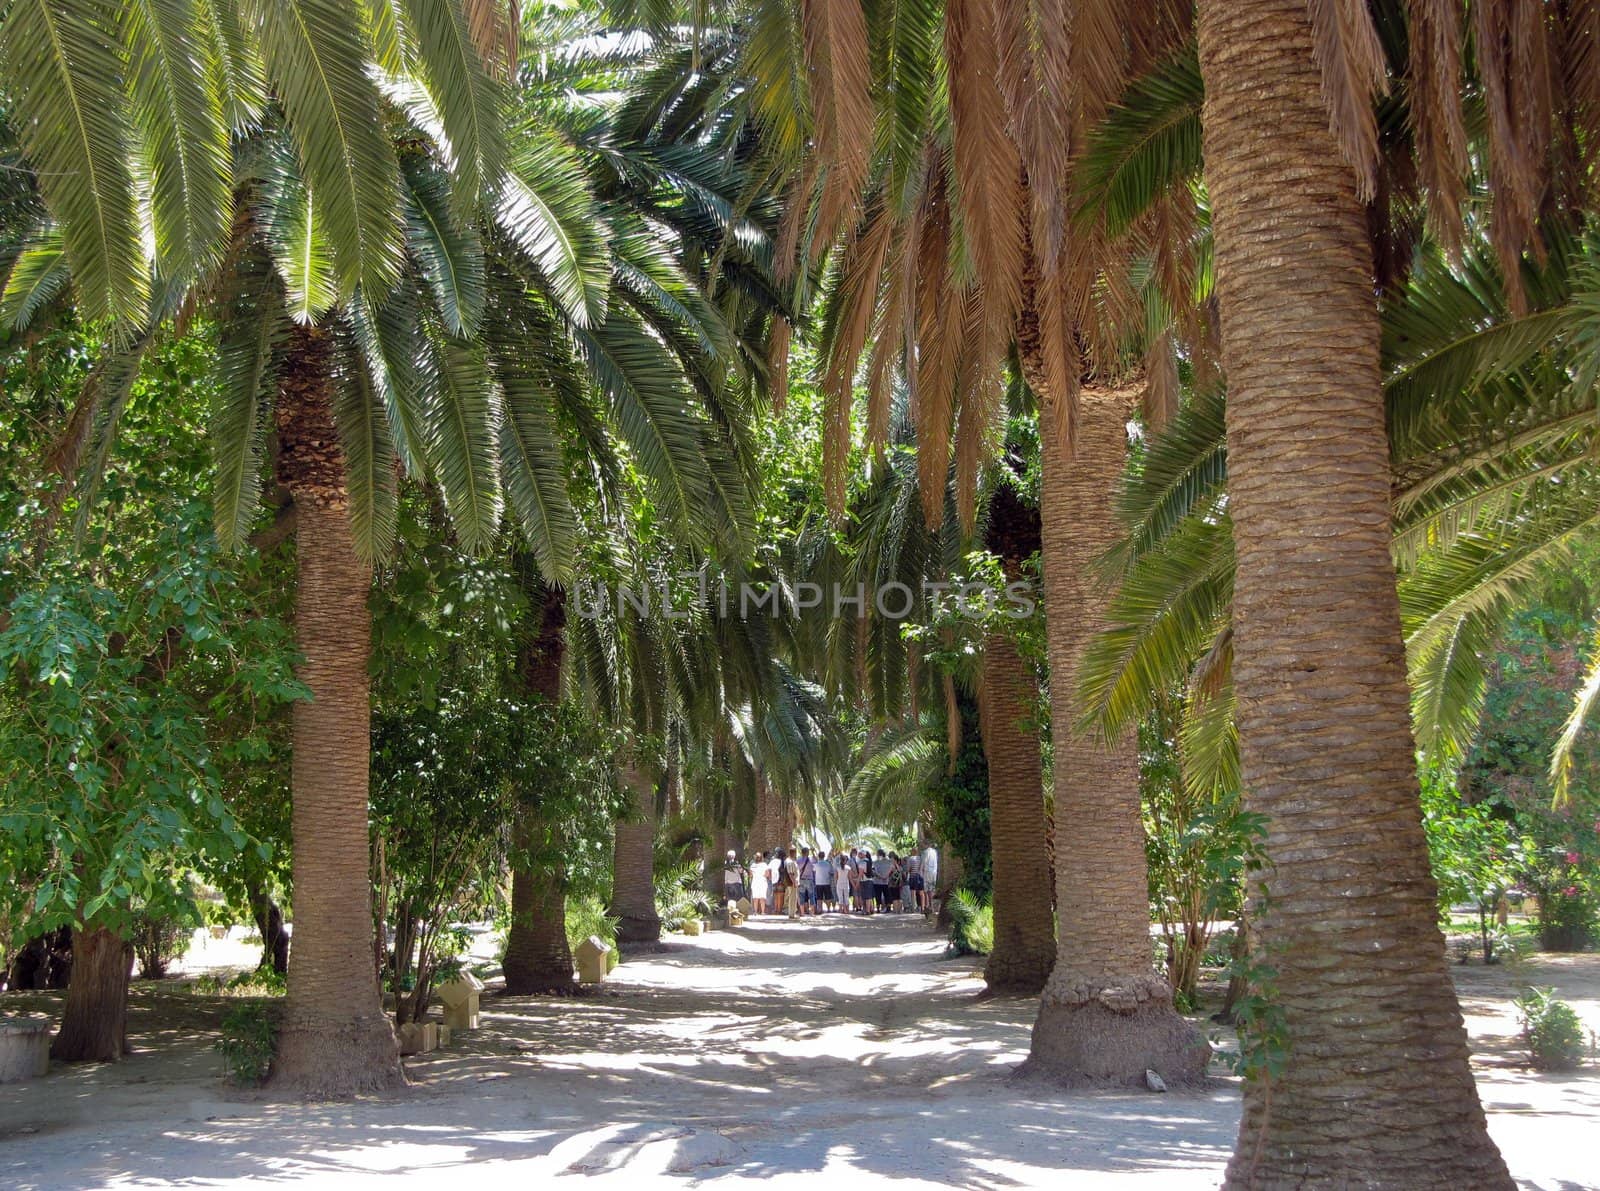  Palm alley in the park in Tunisia